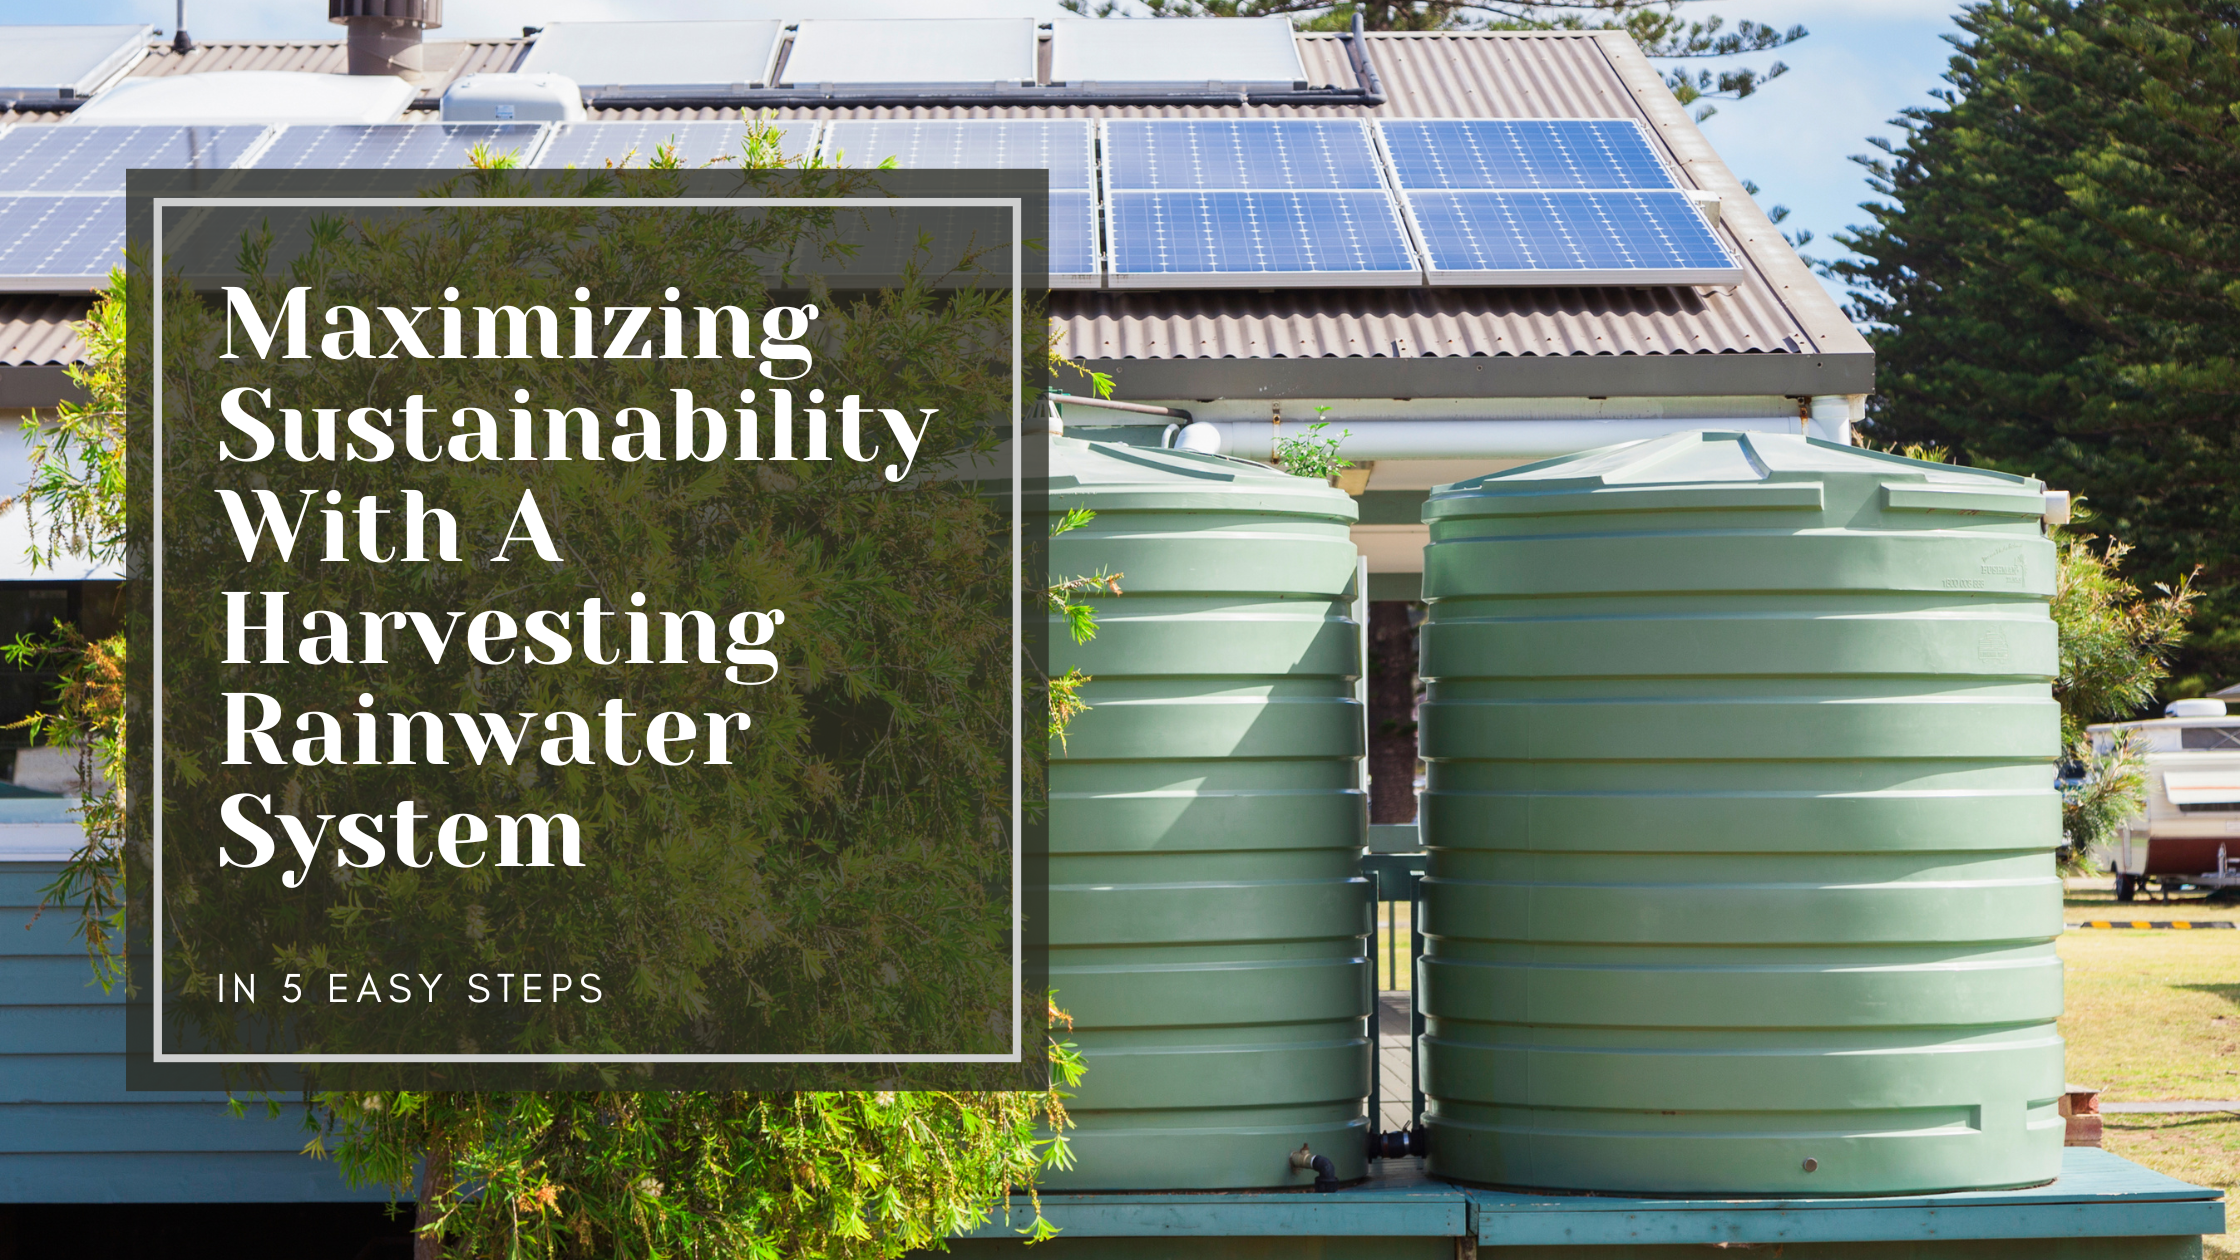 How to Build a Rainwater Harvesting System: 5 Easy Steps